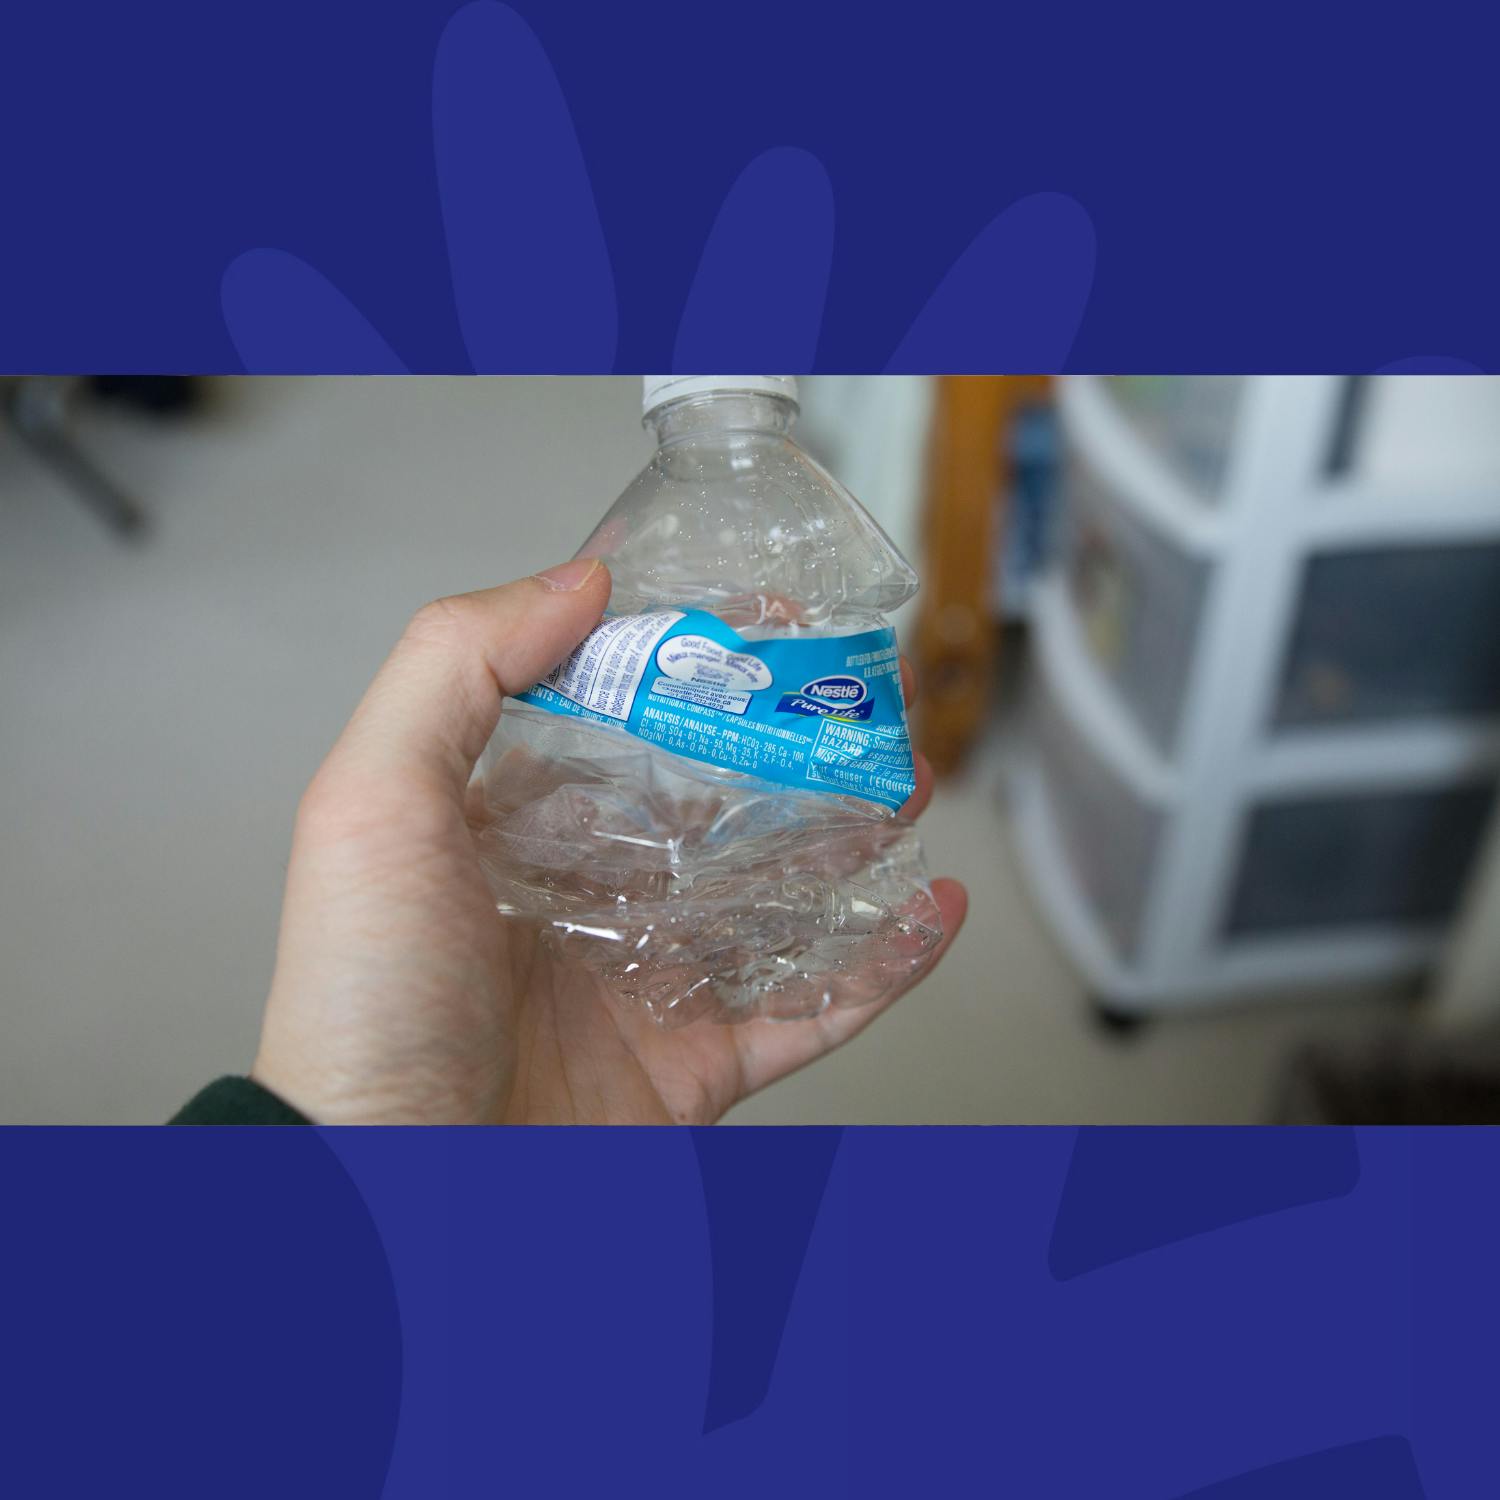 Bottled Water Contains 1/4 Million Pieces Of Nano Plastic Per Bottle